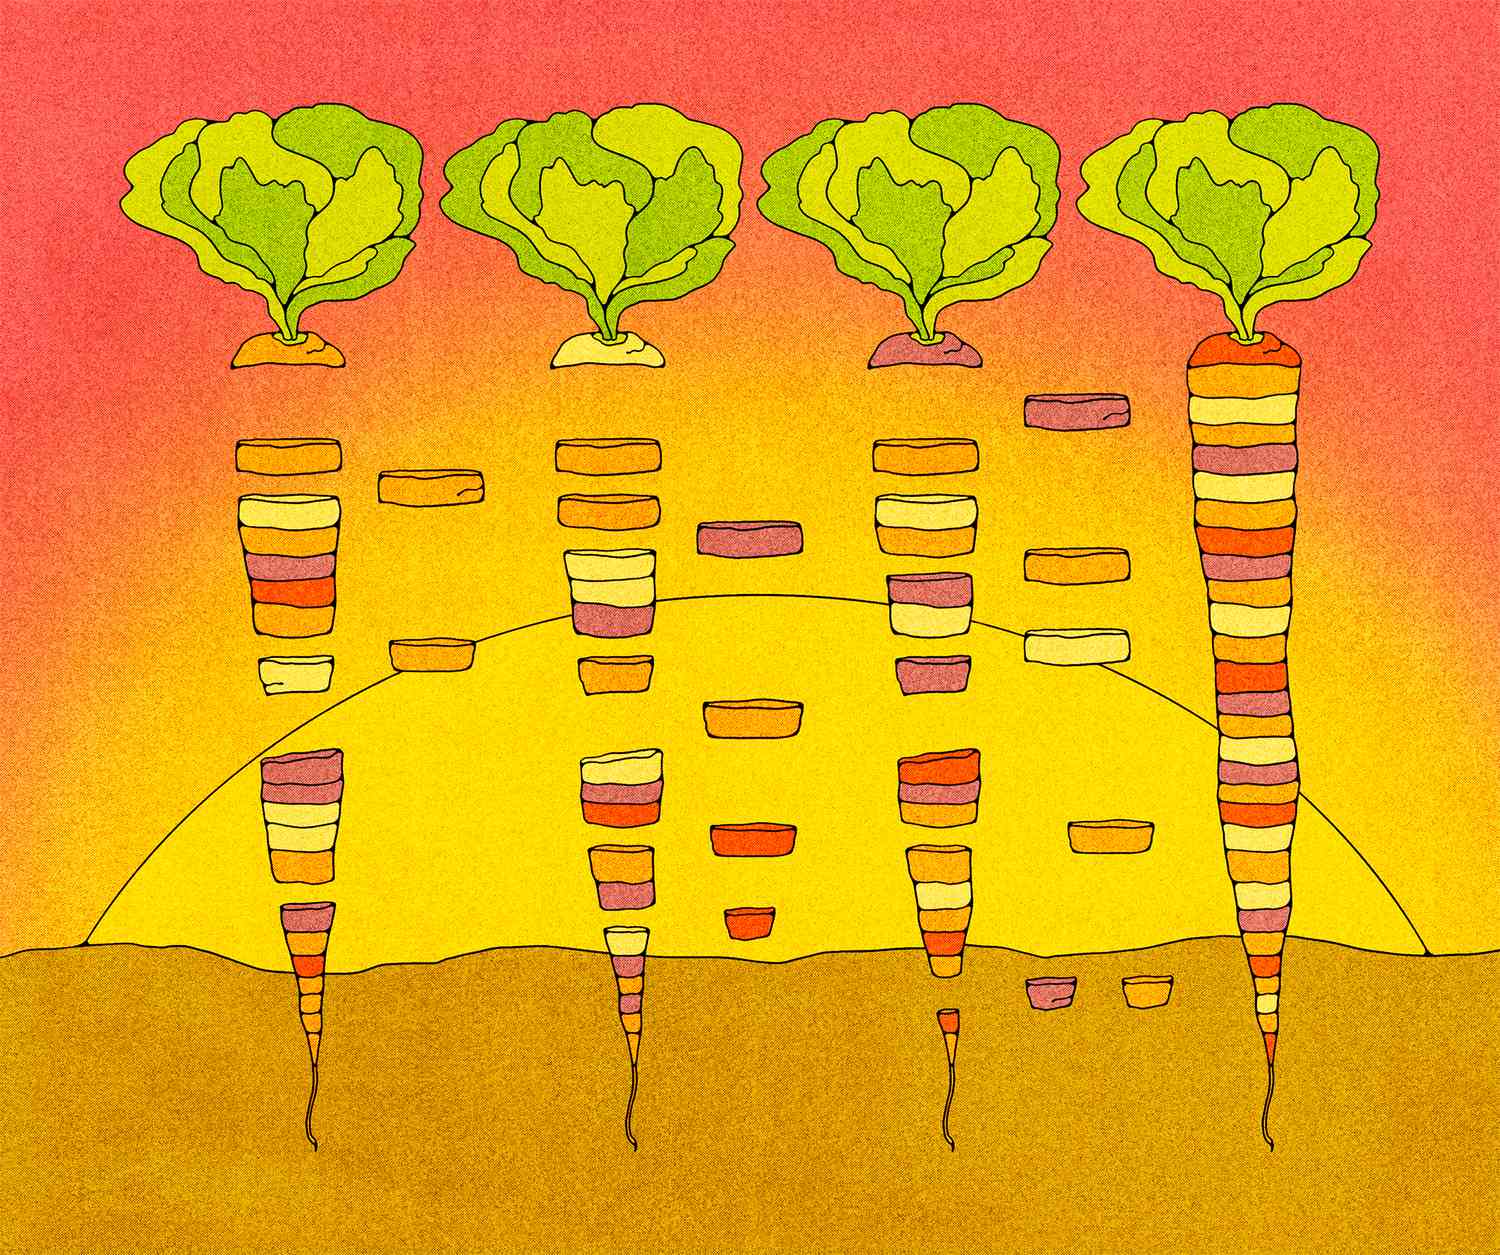 An illustration of multicolored carrots